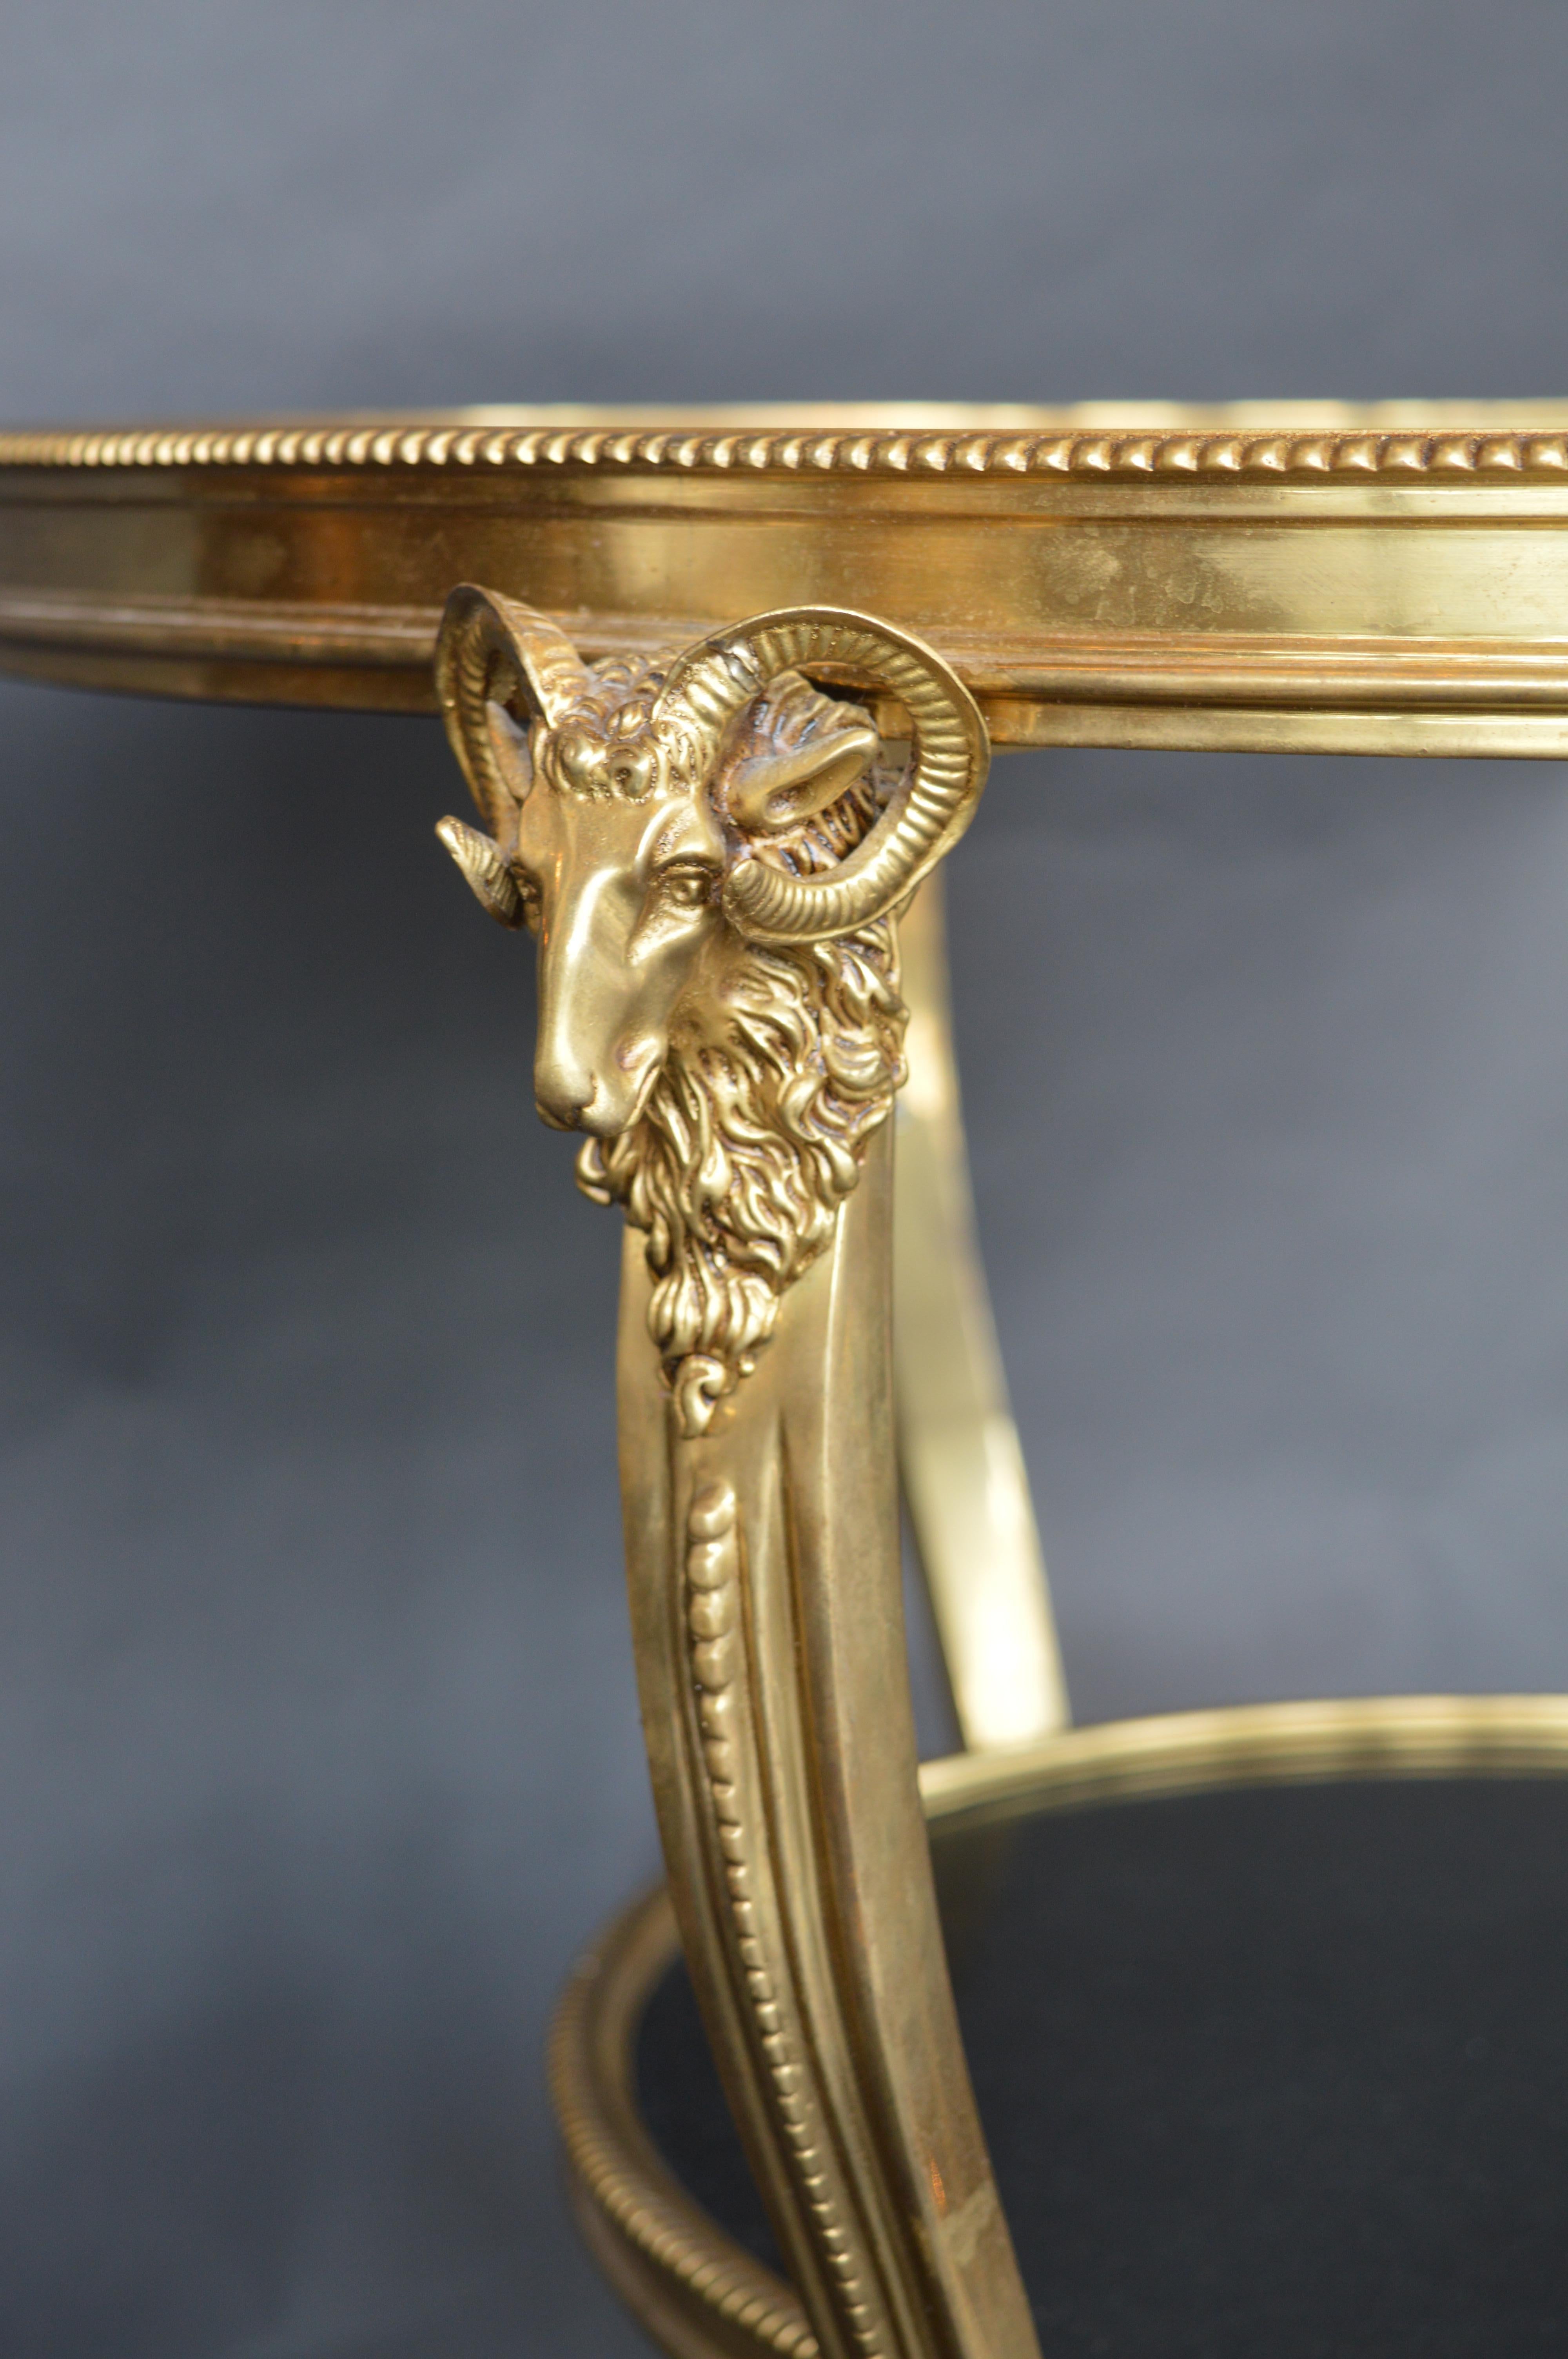 Early 1900s Gueridon table in bronze mounted with rams heads.